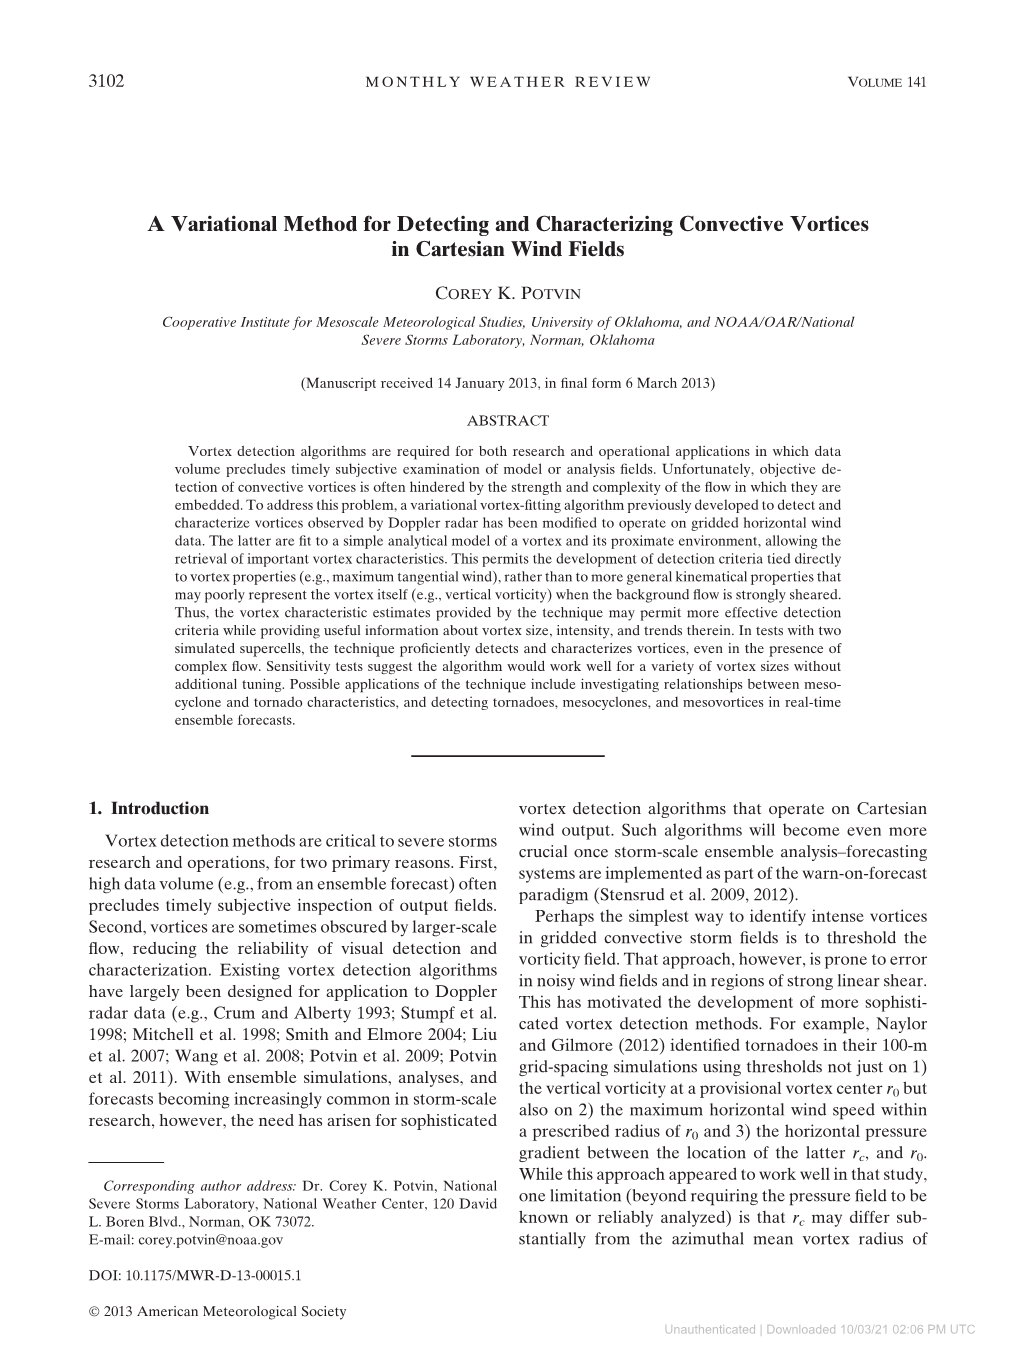 A Variational Method for Detecting and Characterizing Convective Vortices in Cartesian Wind Fields